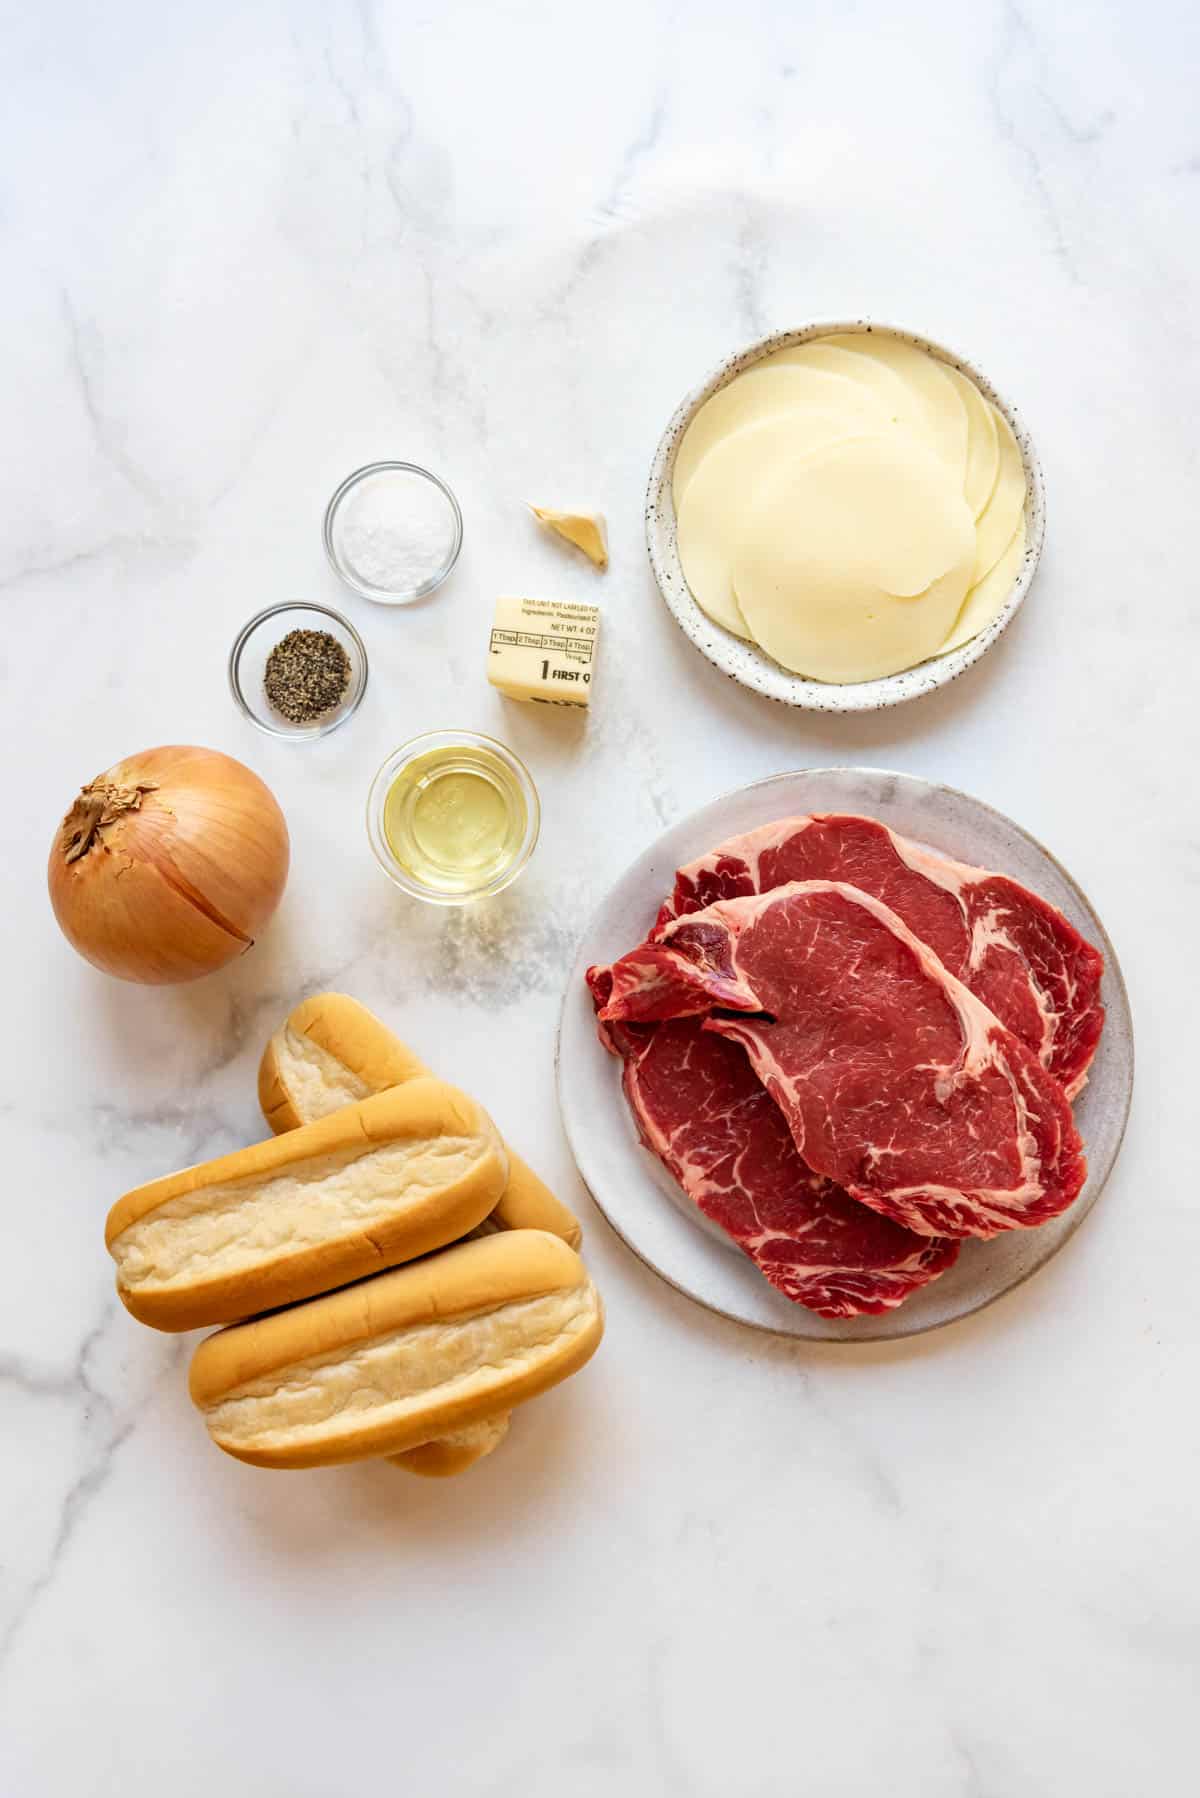 Ingredients for Philly Cheese Steak sandwiches.